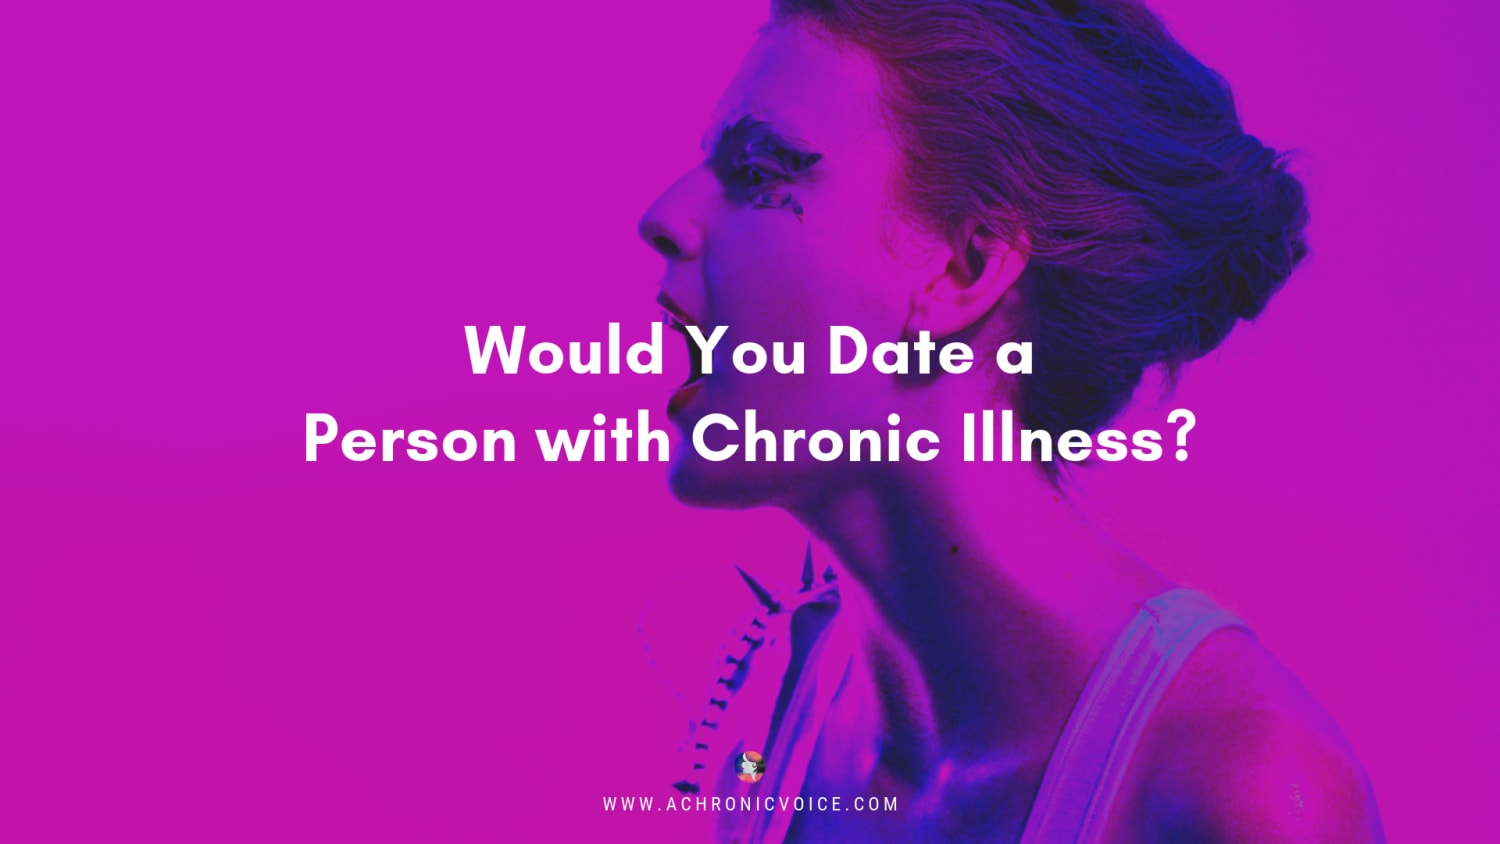 Would You Date a Person with Chronic Illness?